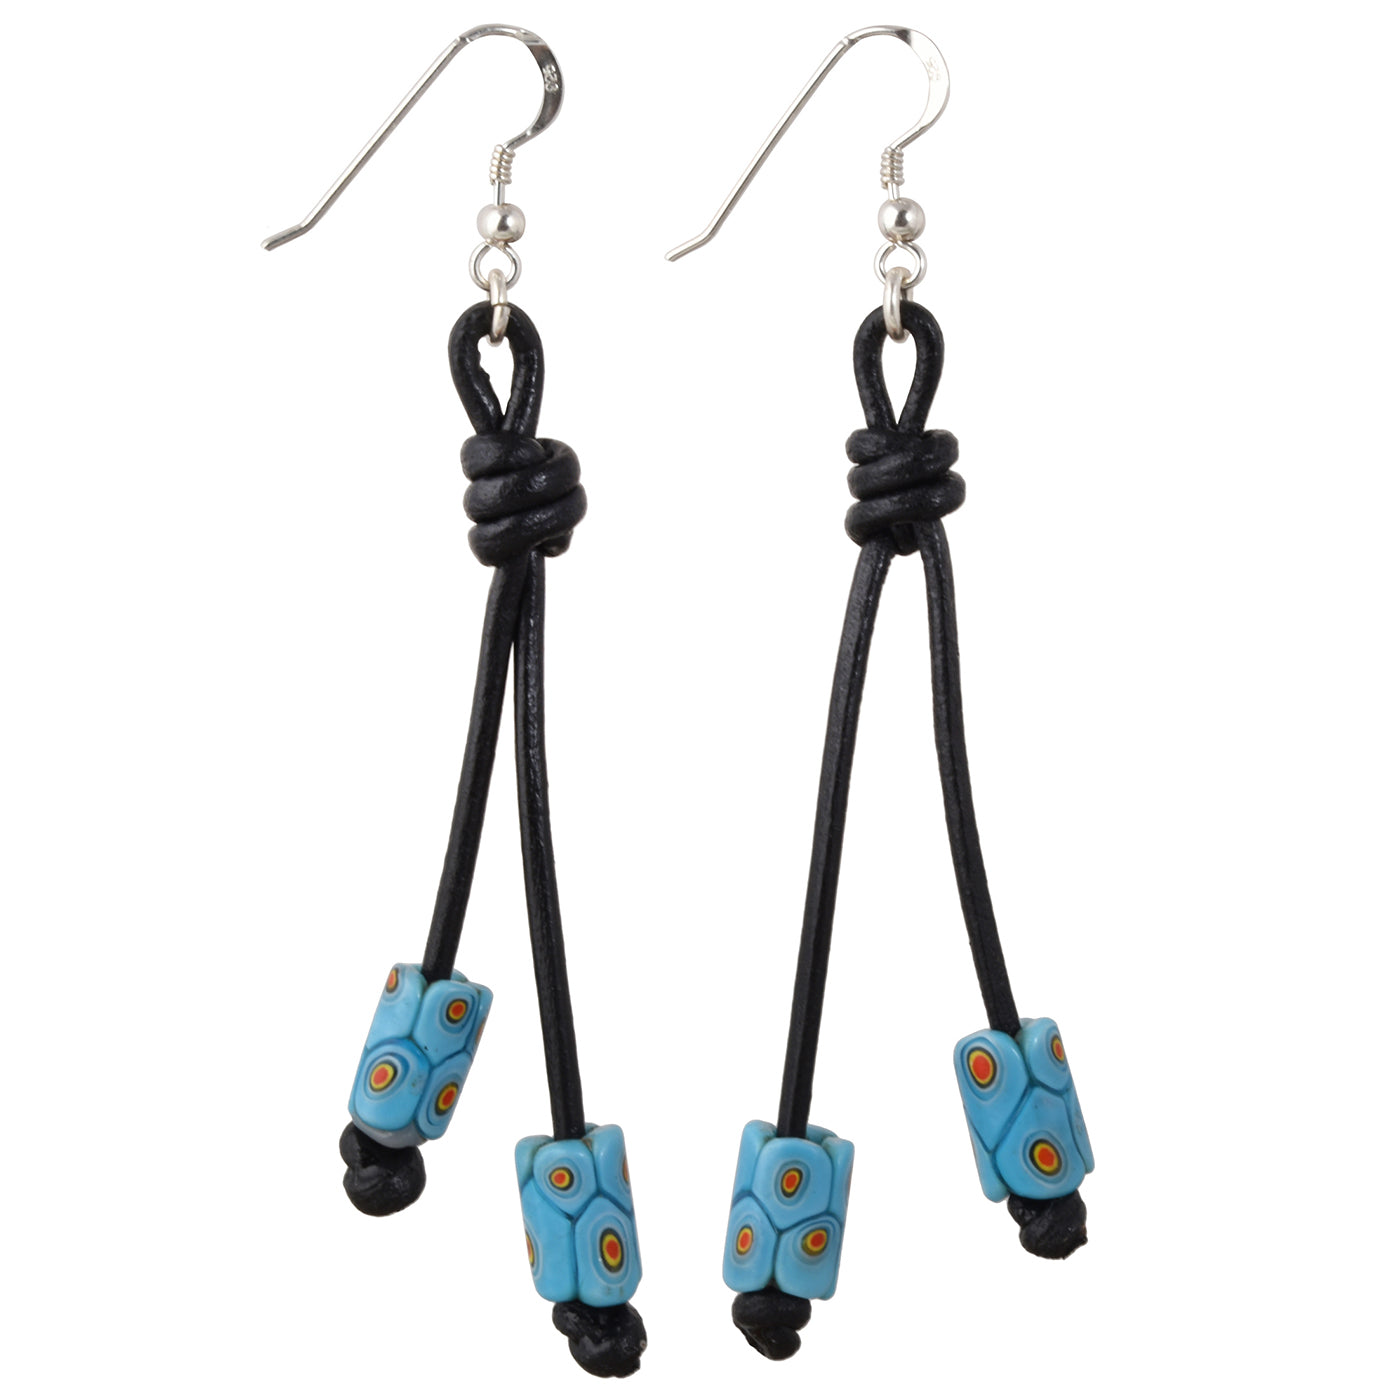 African trade beads antique millefiori earrings 925 sterling silver leather Boho - Tribalgh